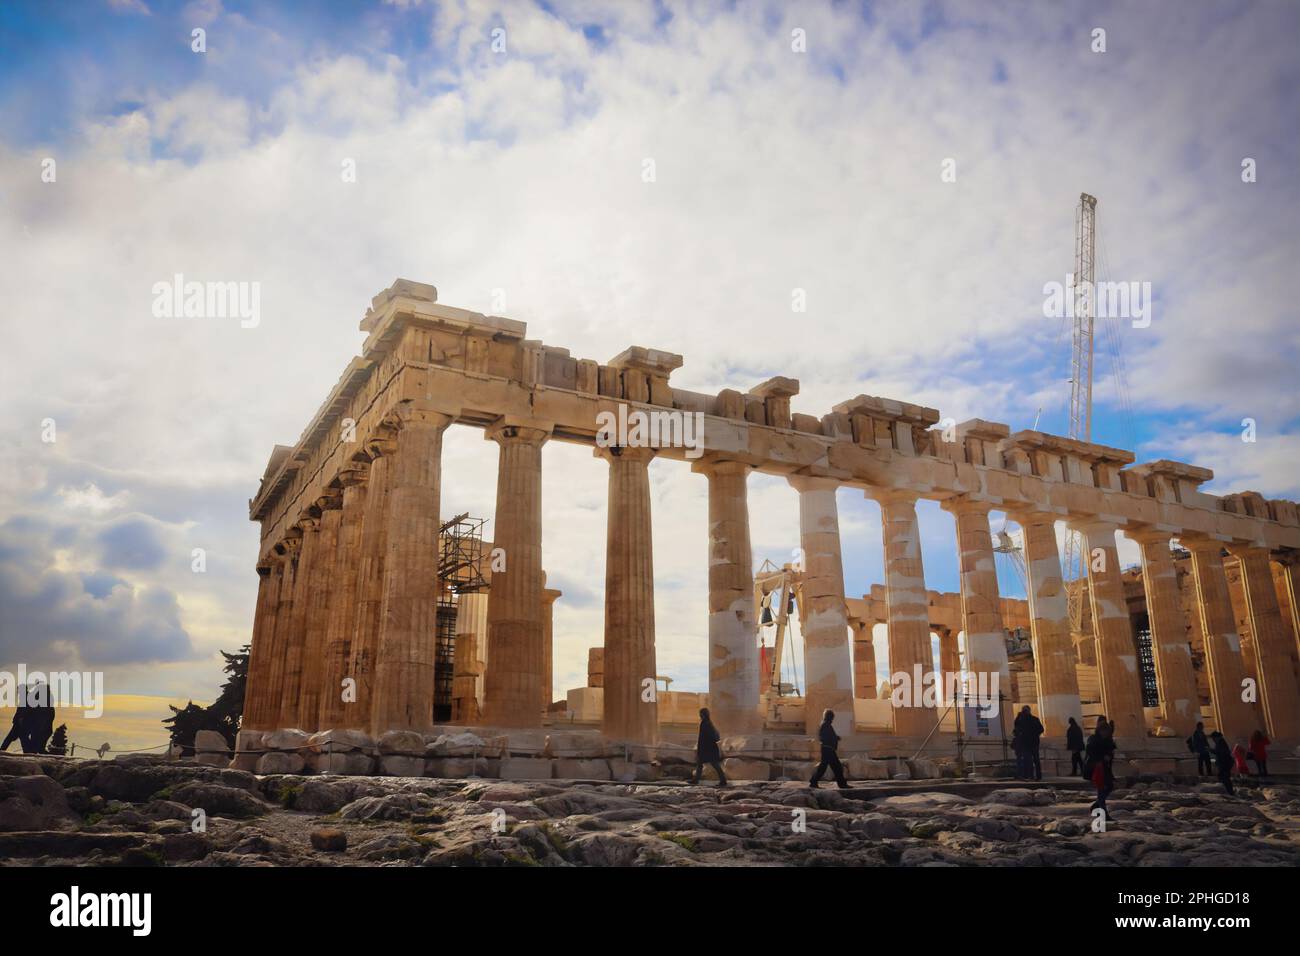 Tourists around the  Parthenon on the Acropolis in Athens Greece - Building undergoing reconstruction with cranes and other machinery Stock Photo